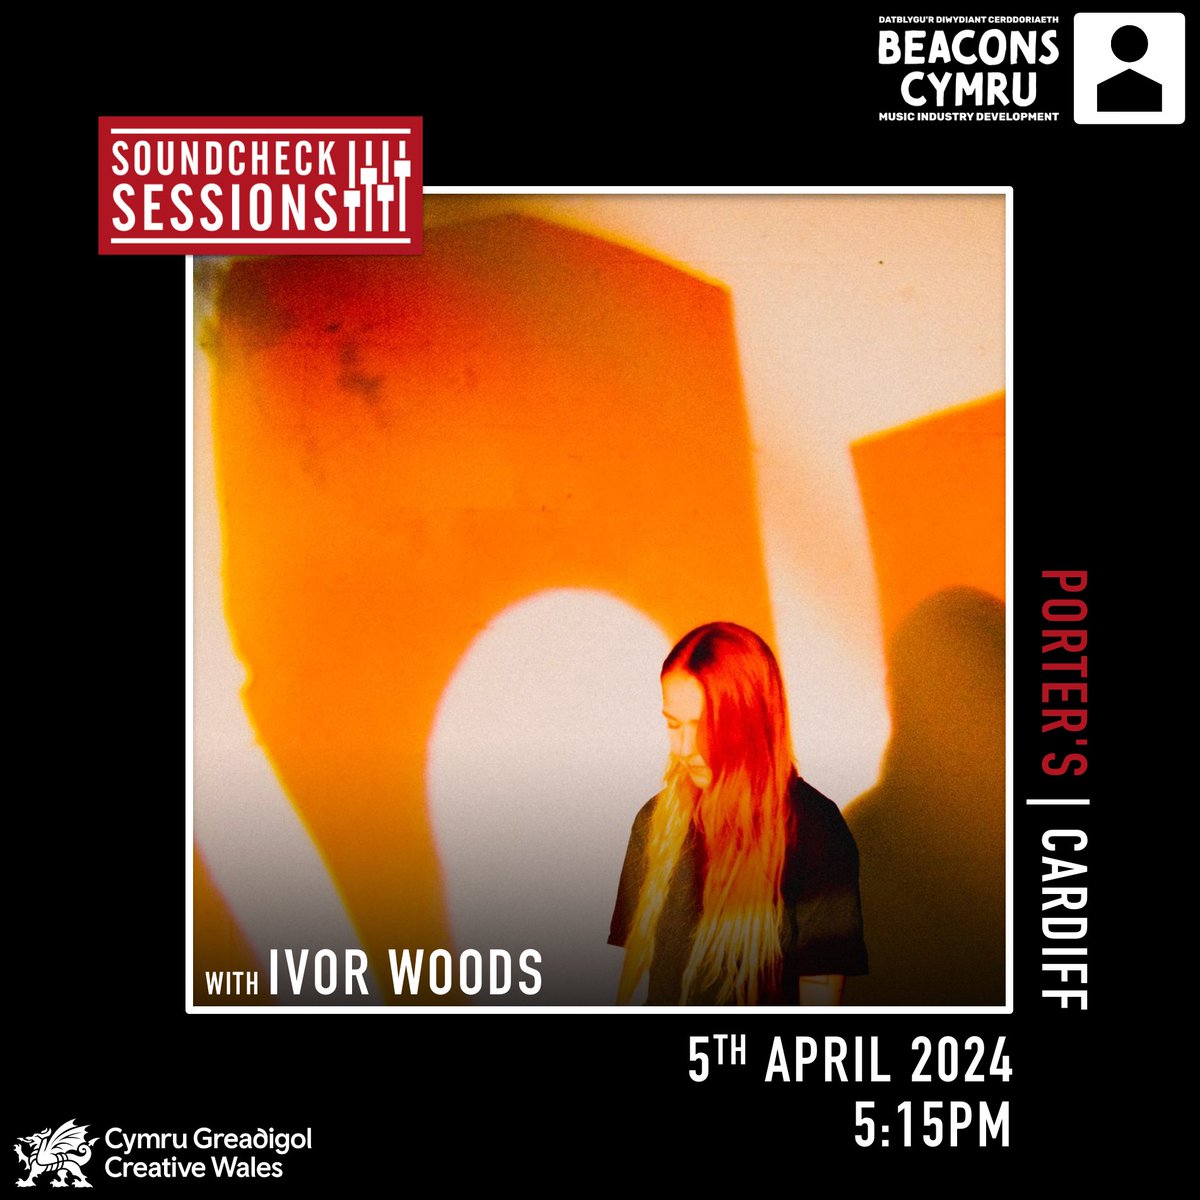 We are delighted to be hosting a Soundcheck Session for young people in South Wales with multi-instrumentalist Ivor Woods at @porterscardiff ❤️ If you would like to attend, register free here: ow.ly/iiQW50R3nqJ